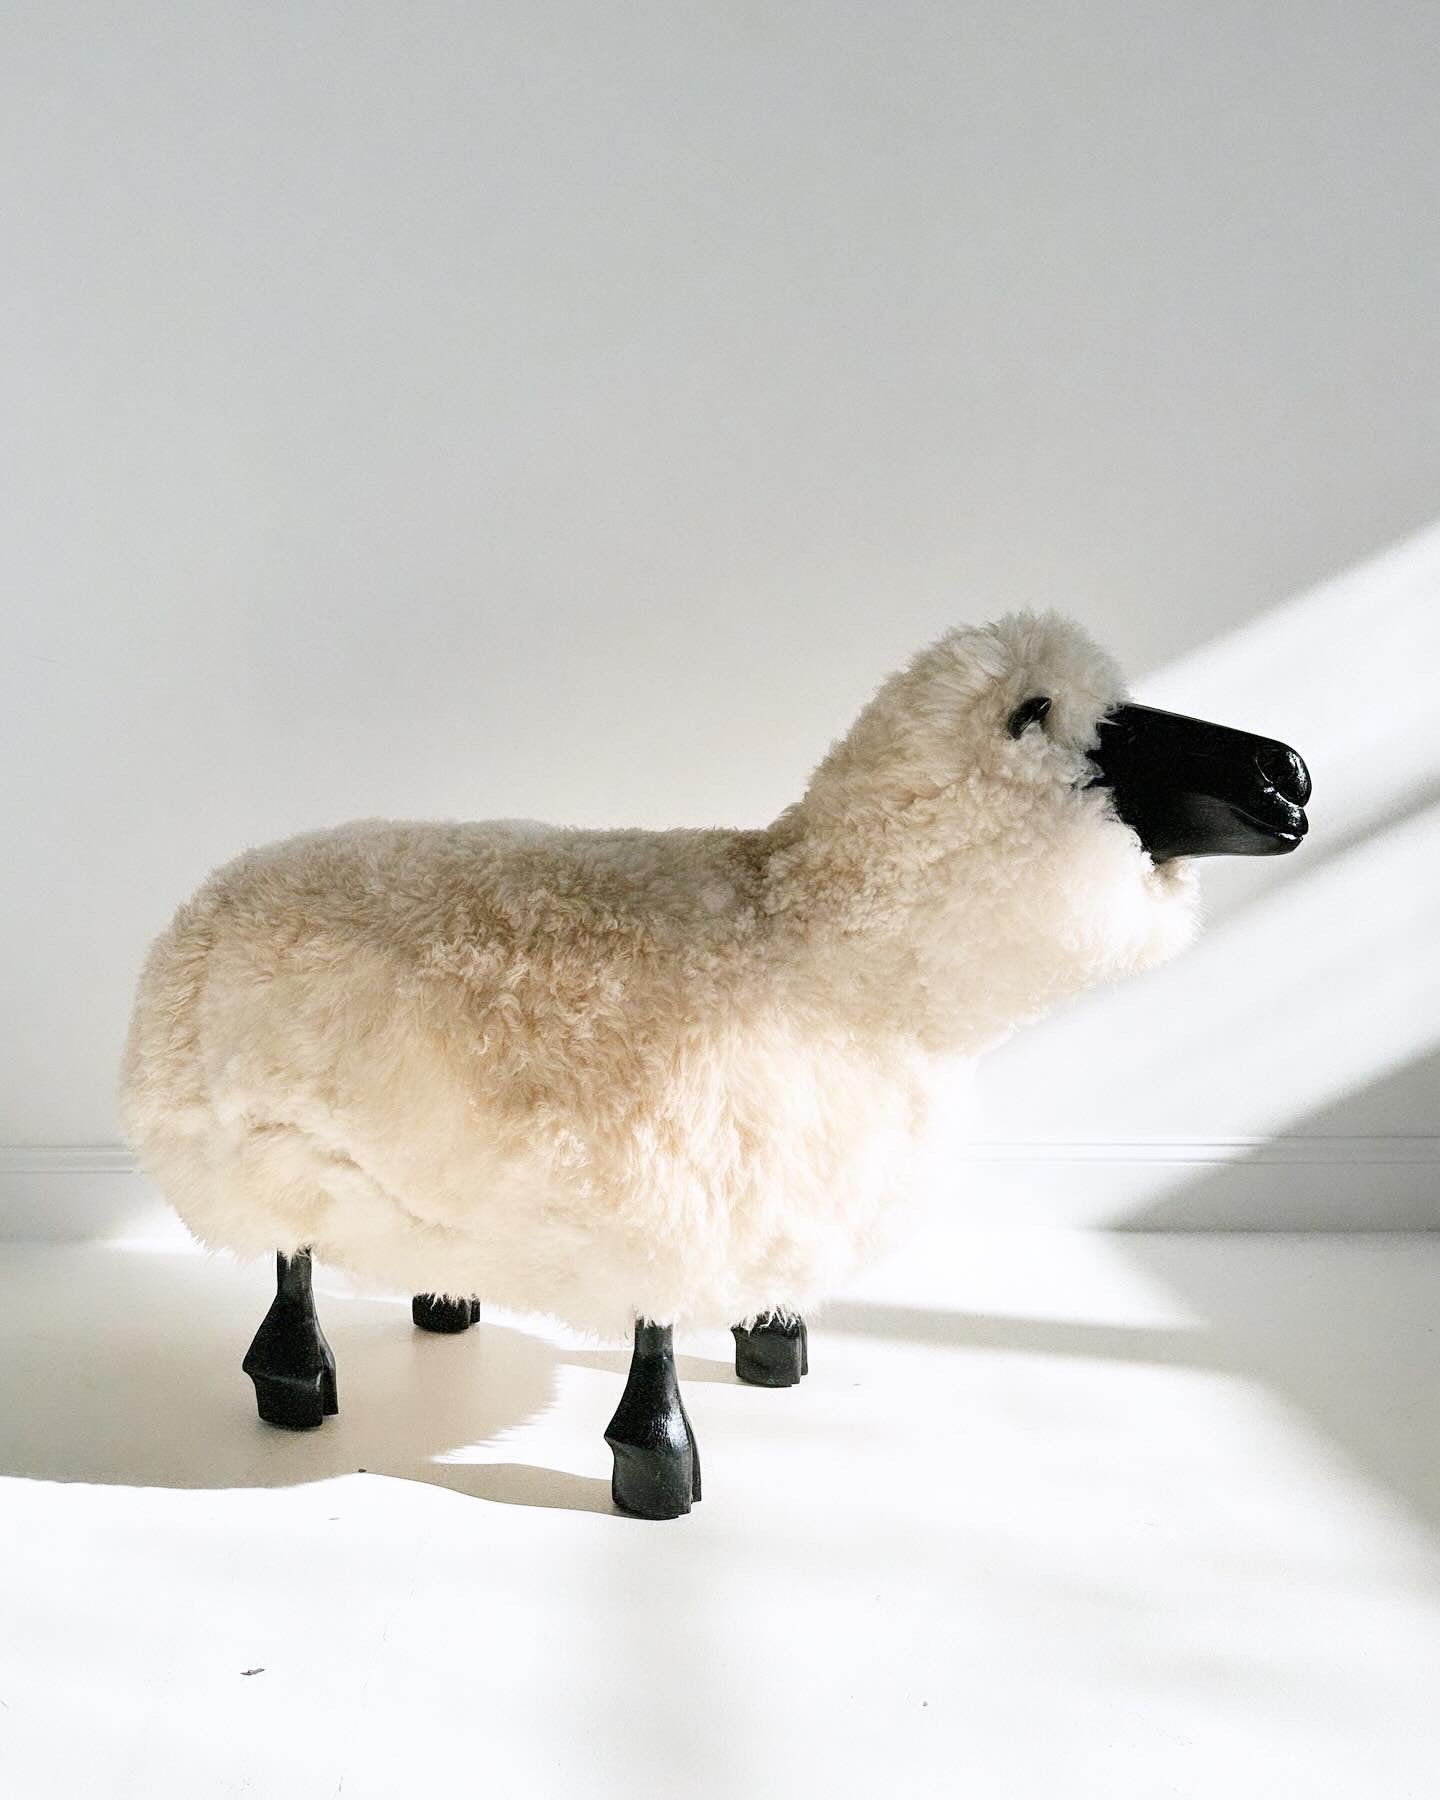 Sheep Sculptures in the Manner of LaLanne